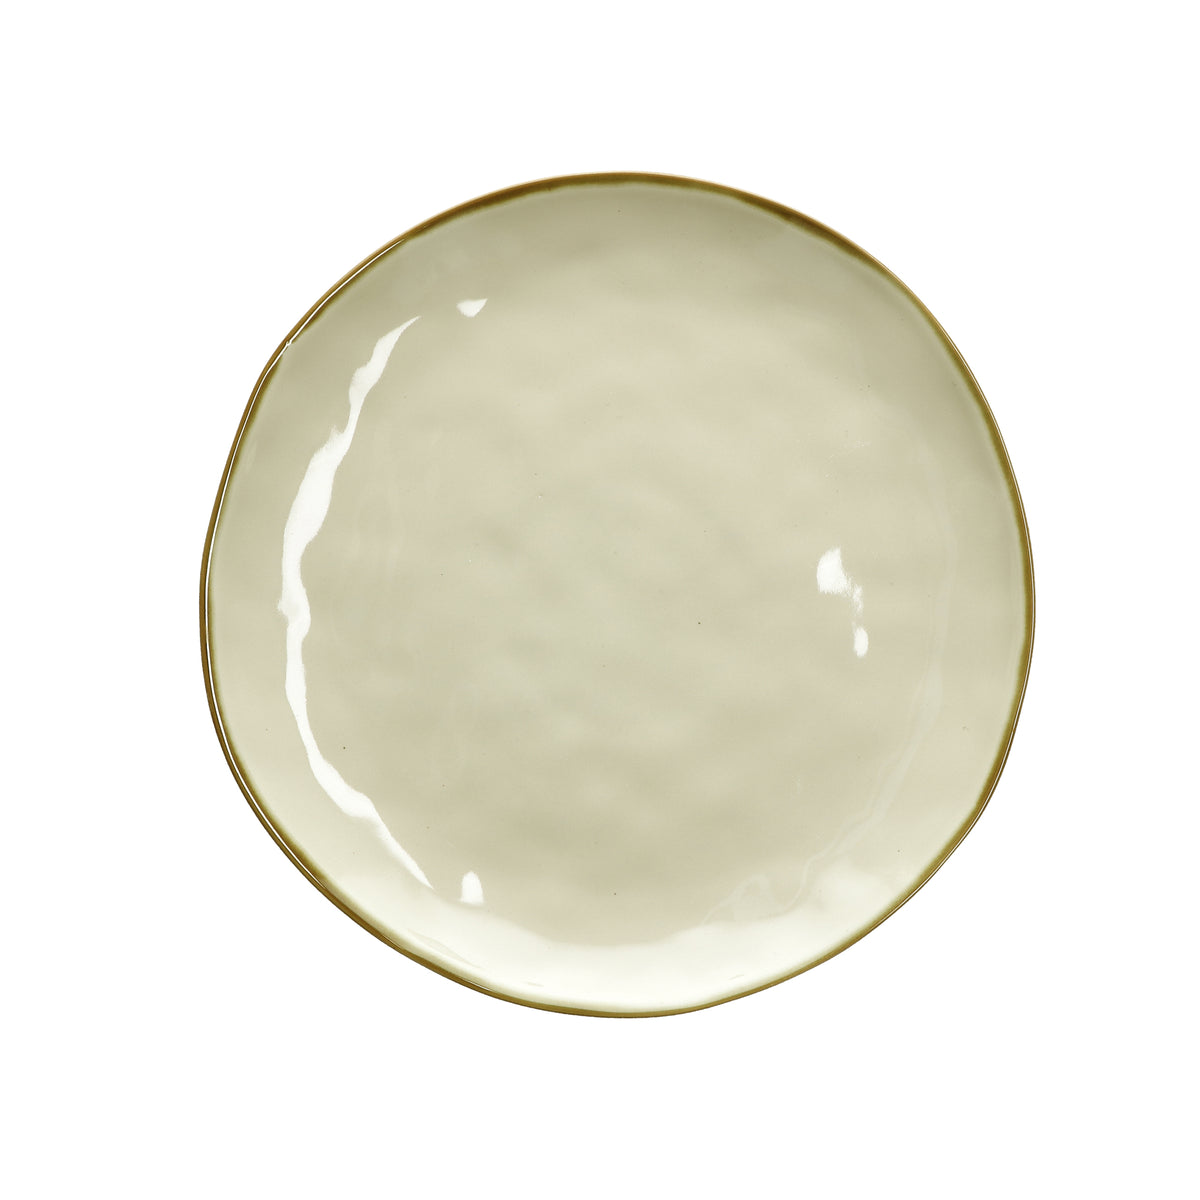 Rose & Tulipani - Concerto Dinner Plate Ø 27 cm -  Available in 6 Colours